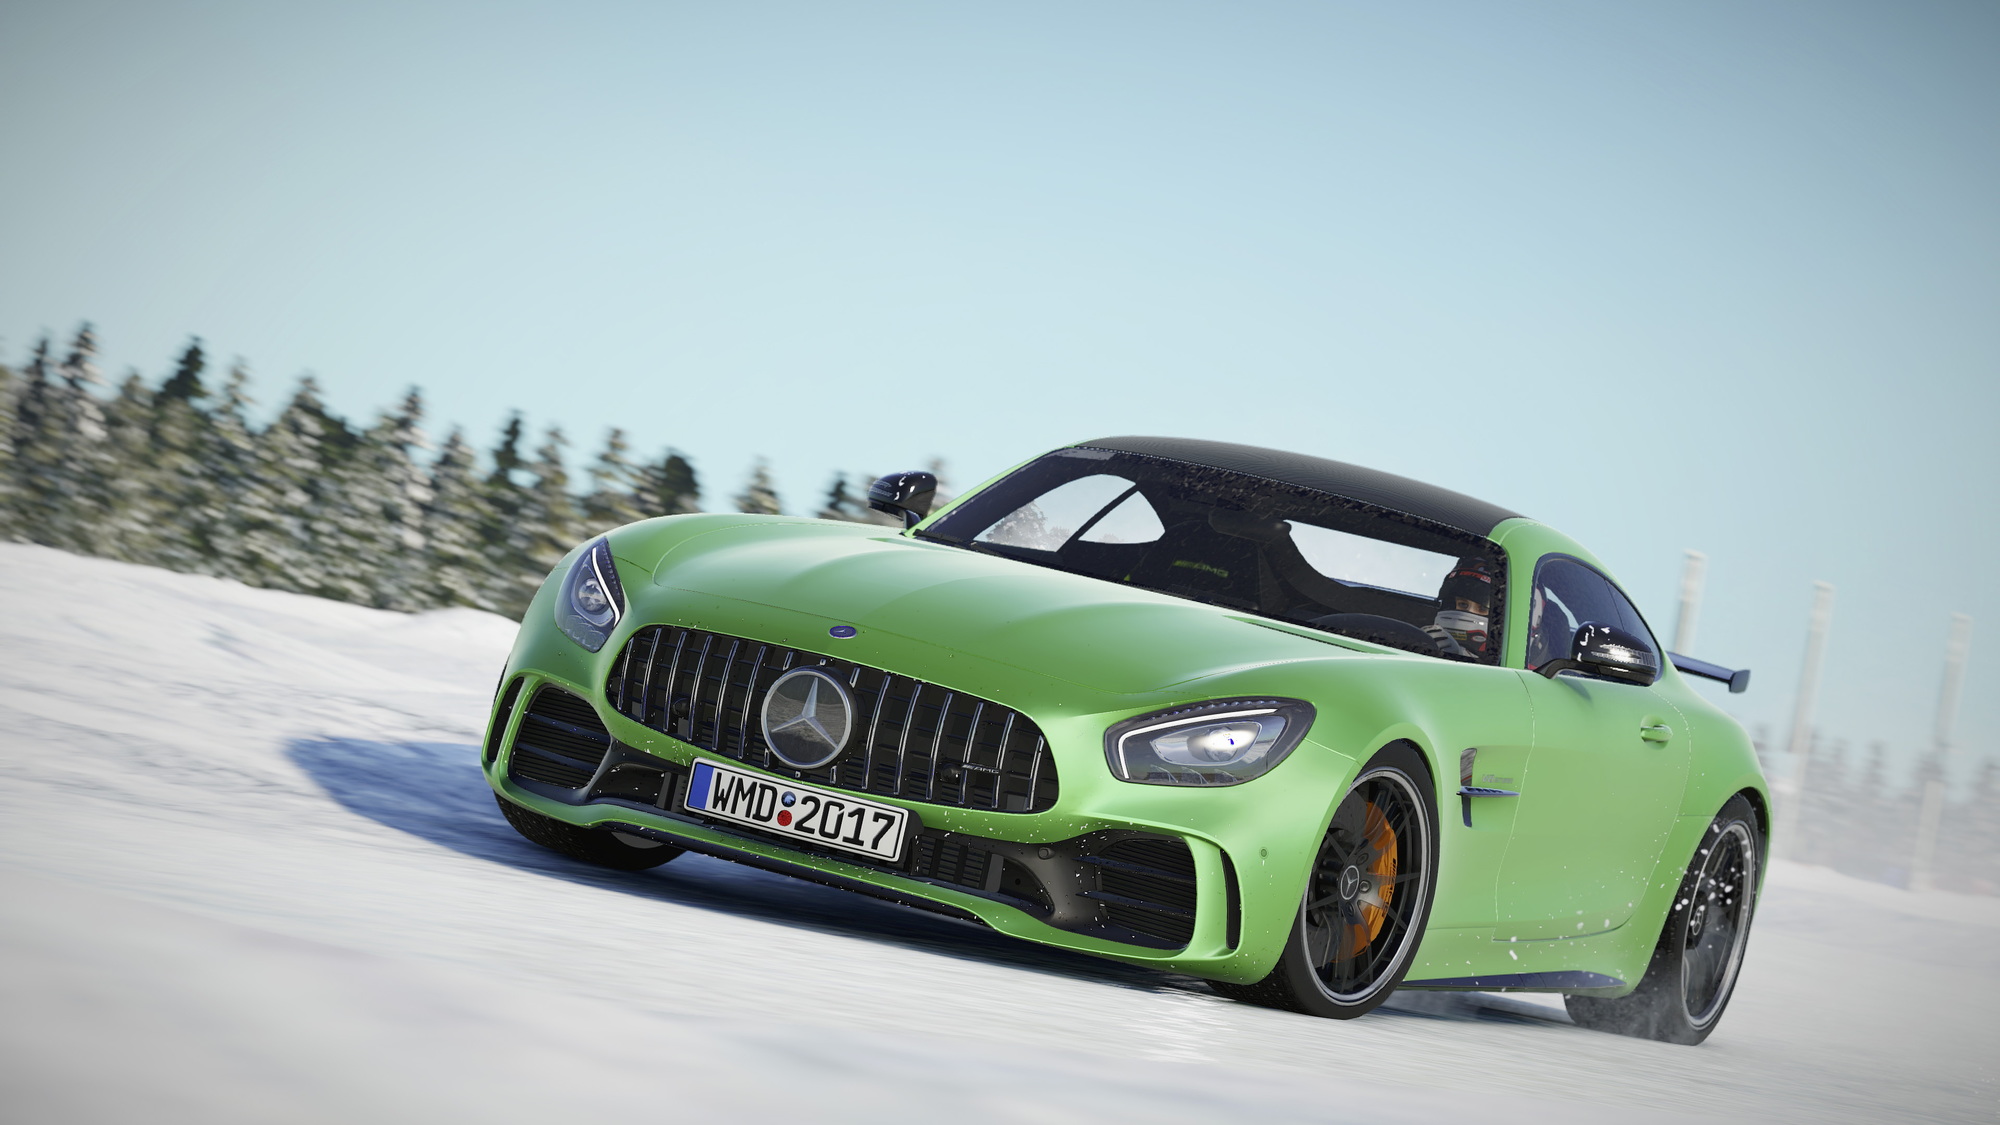 Mercedes-Benz bringing its driving experiences to the world of Project CARS 2